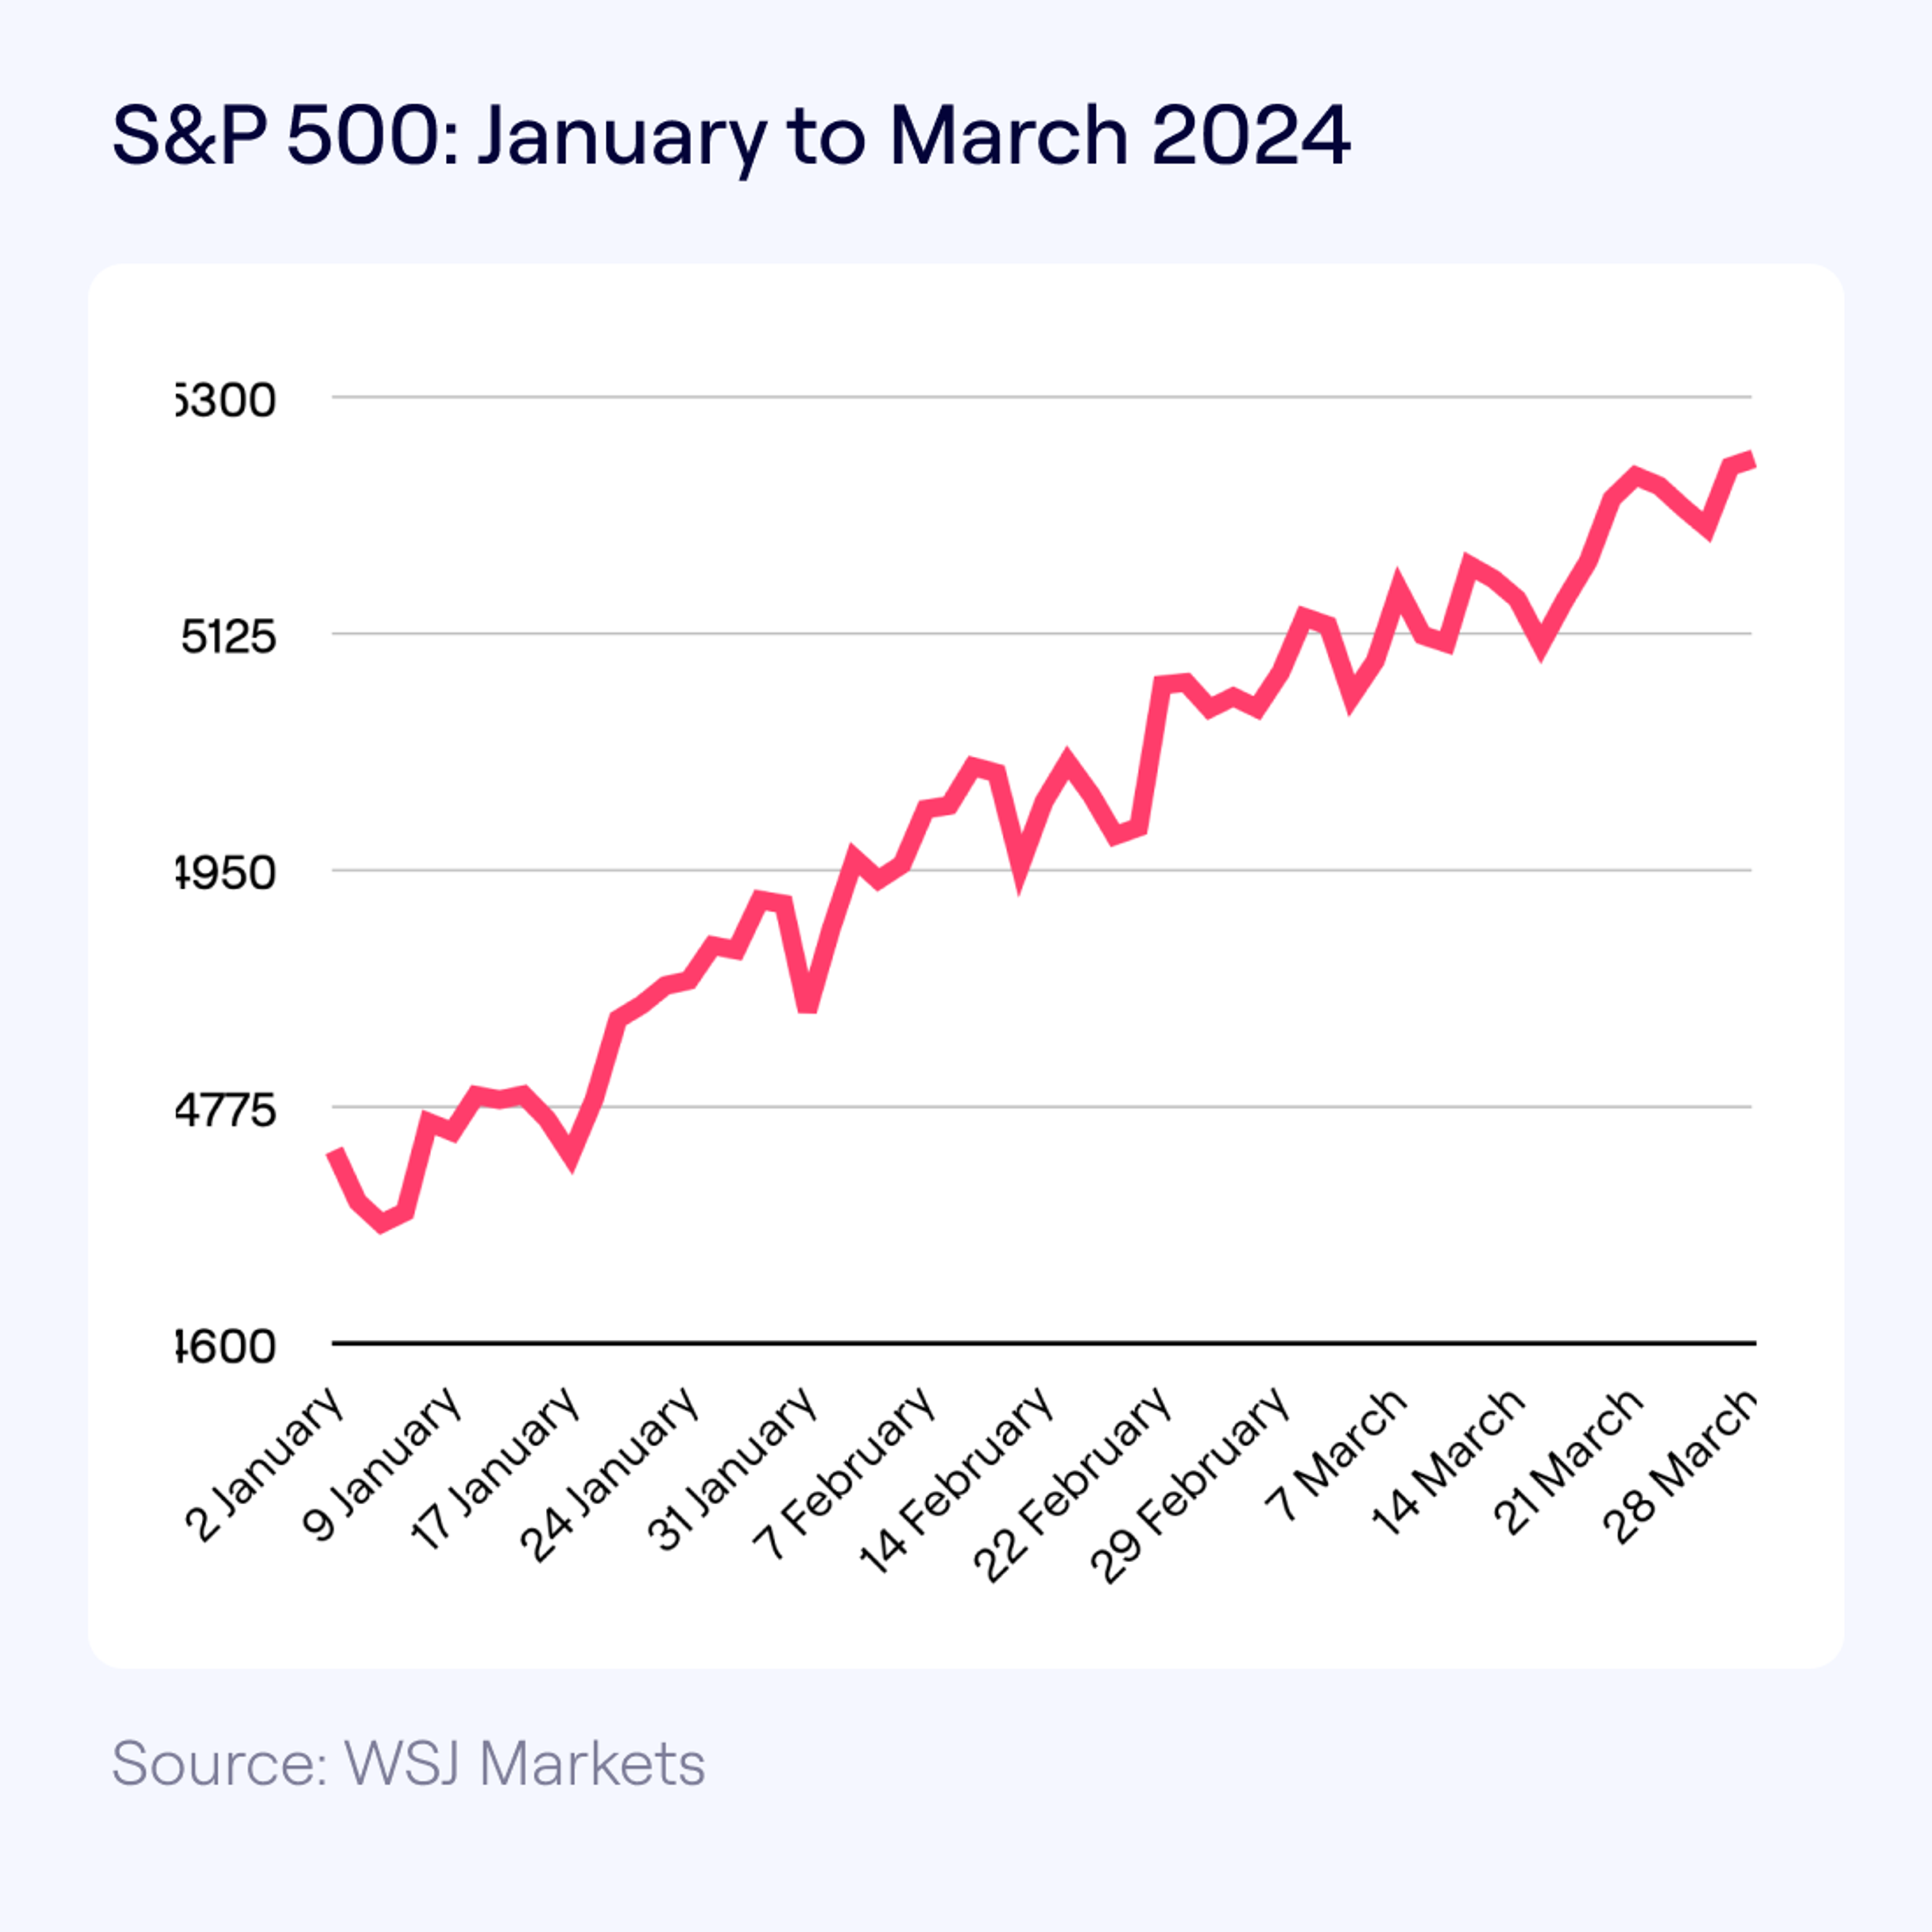 Line graph displaying the S&P 500 index from January to March 2024, showing an overall upward trend with some fluctuations. Early January marks the lowest point, with a steady rise towards March.